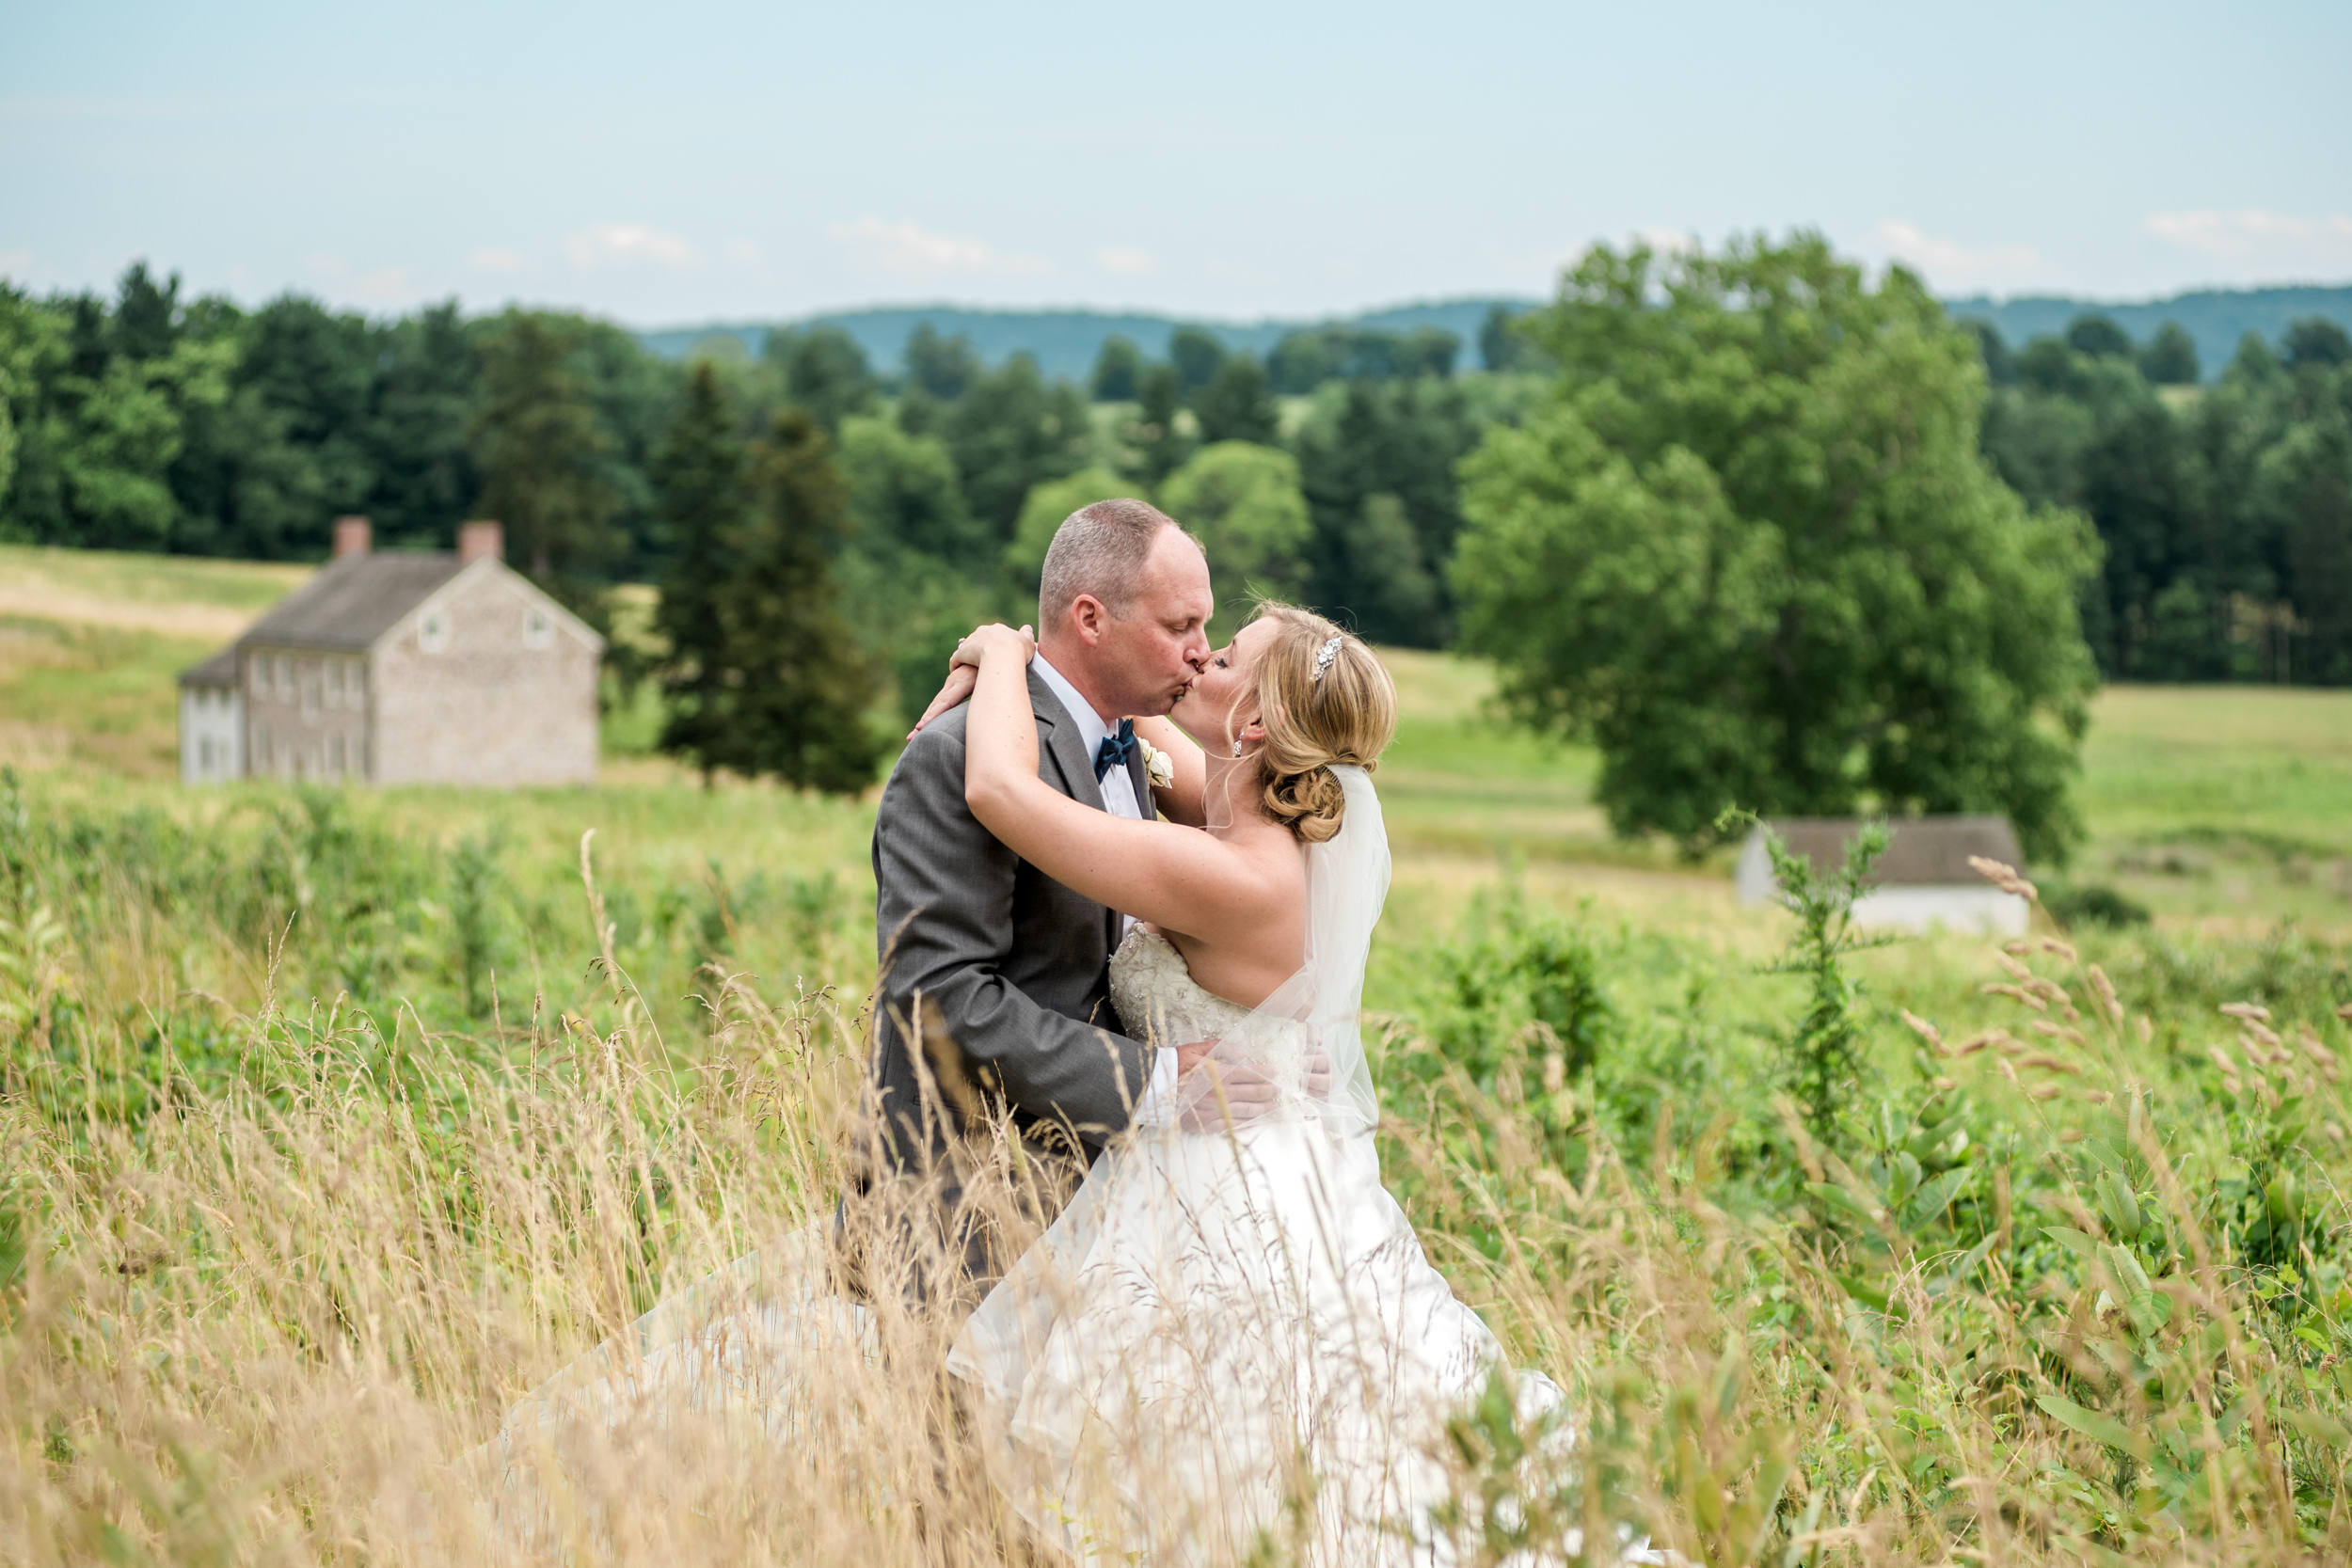 Wedding photos at Valley Forge National Historic Park